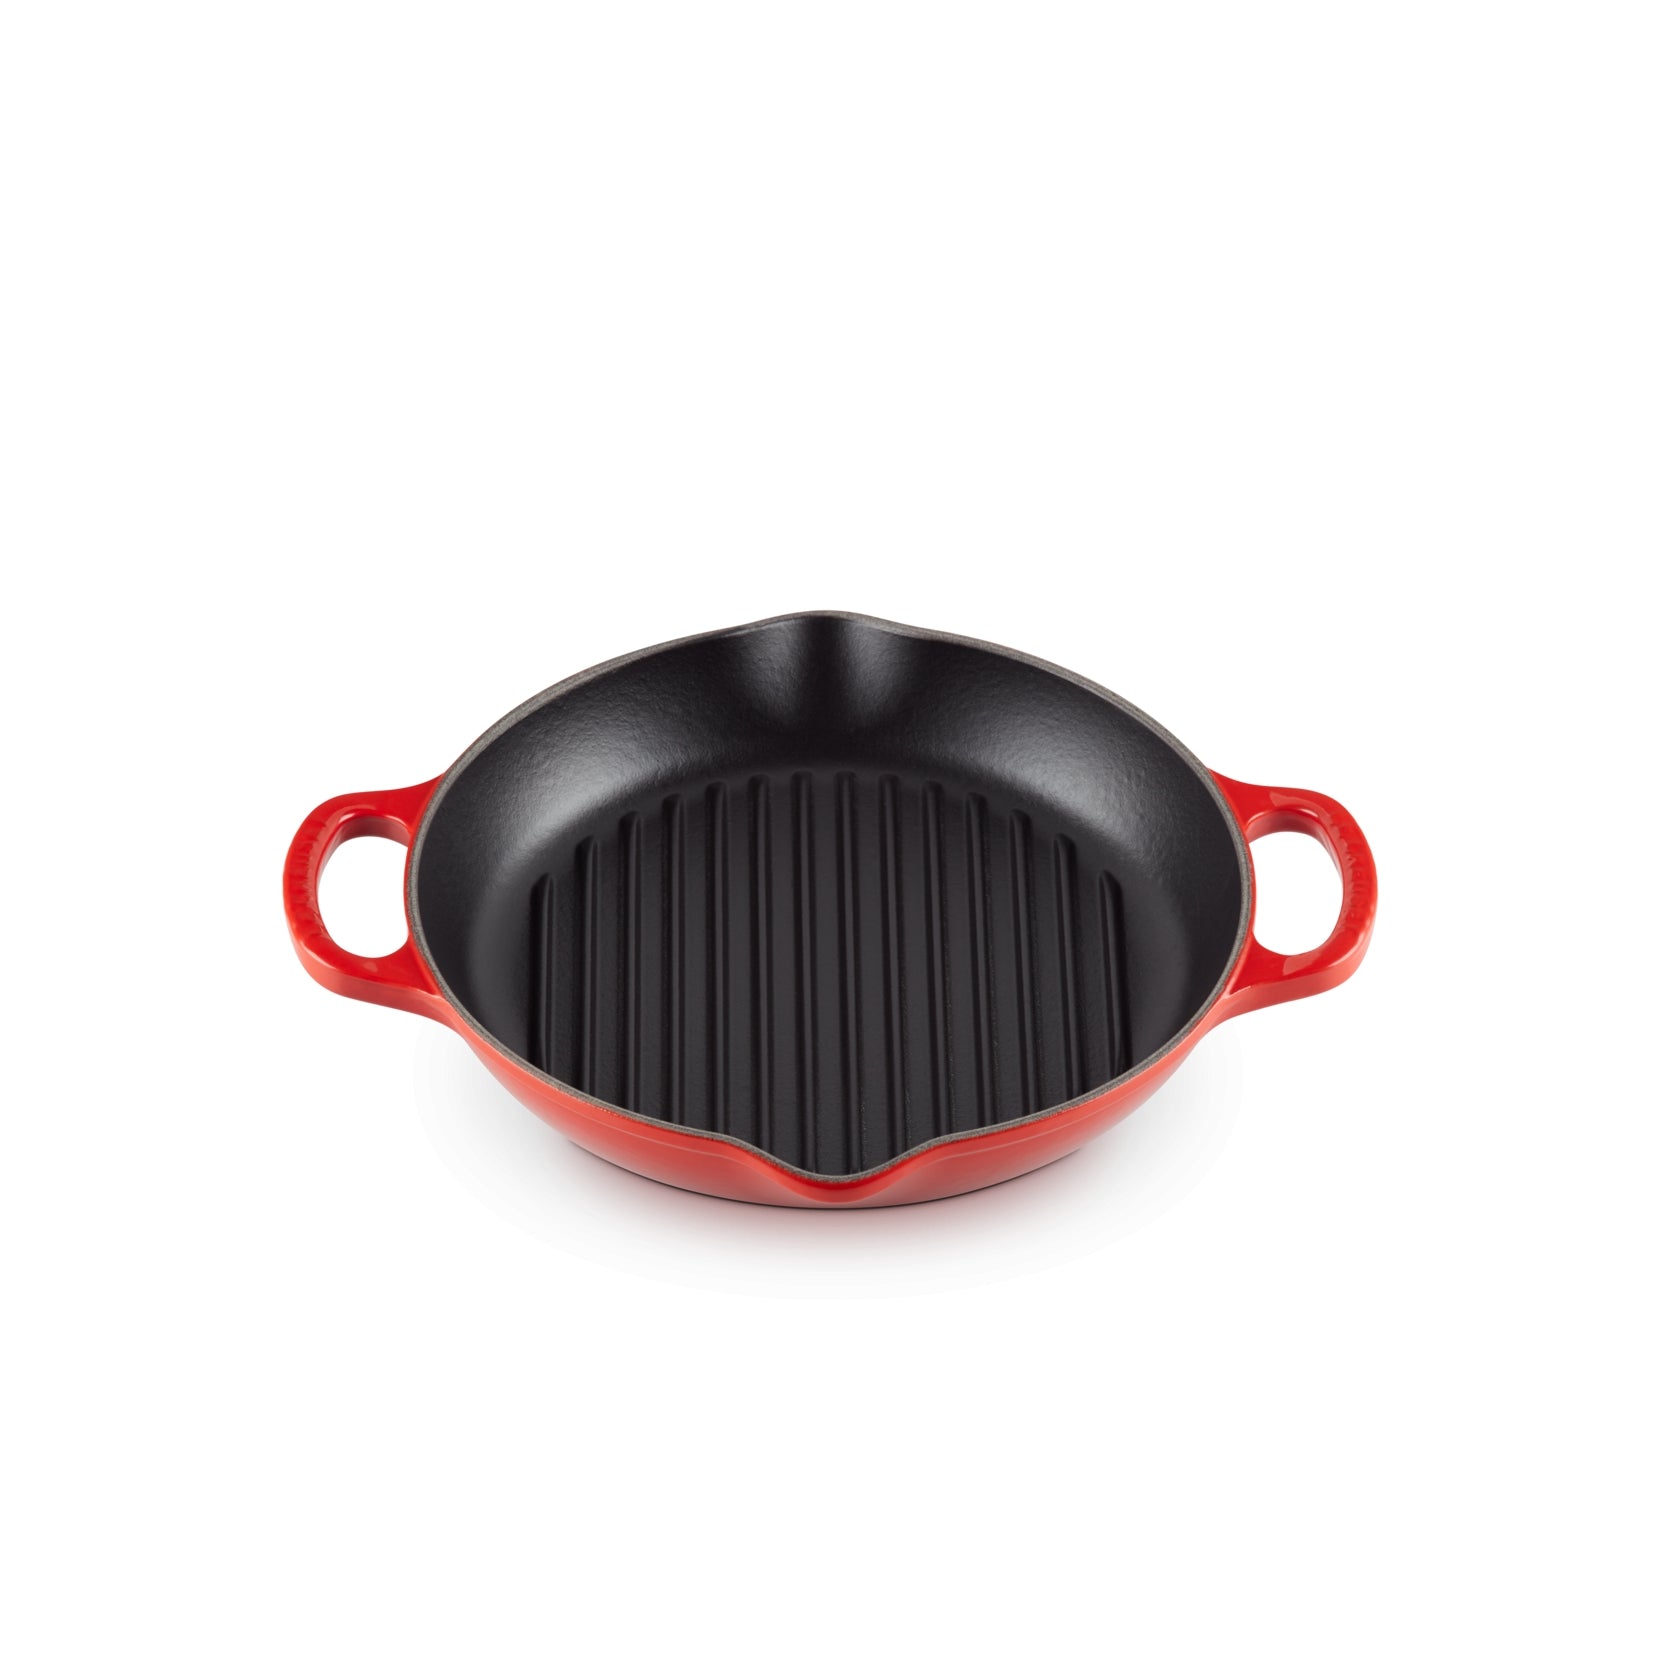 Le Creuset - 25cm Cherry Red / Cerise Deep Round Grill Side